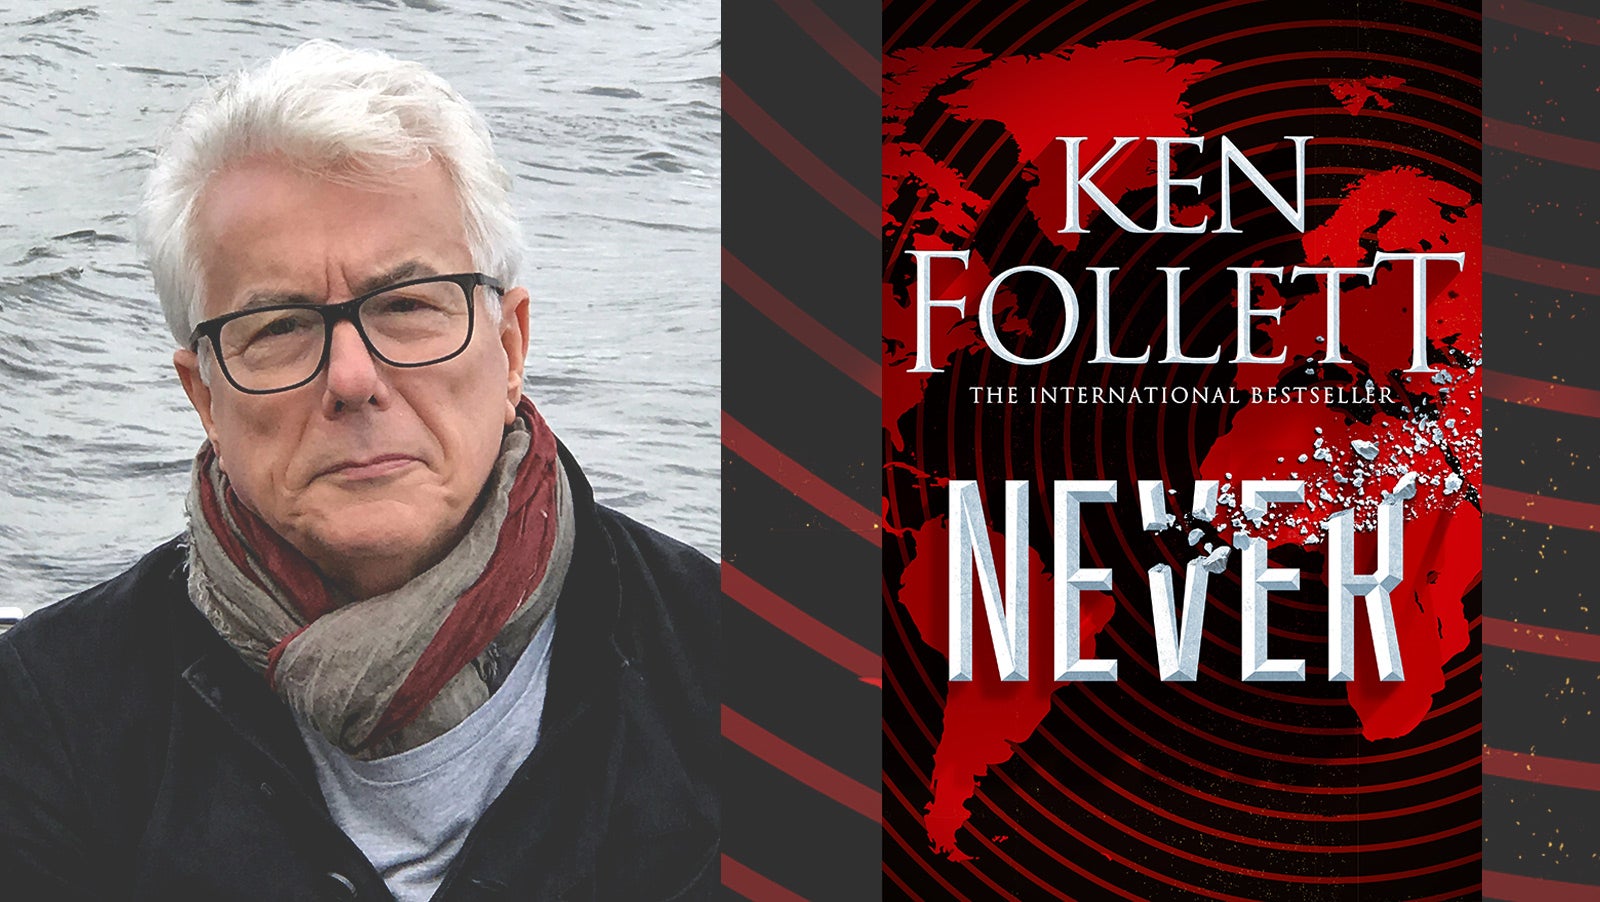 Ken Follett Announces More Details Of His Novel Never To Be Published In November Pan Macmillan